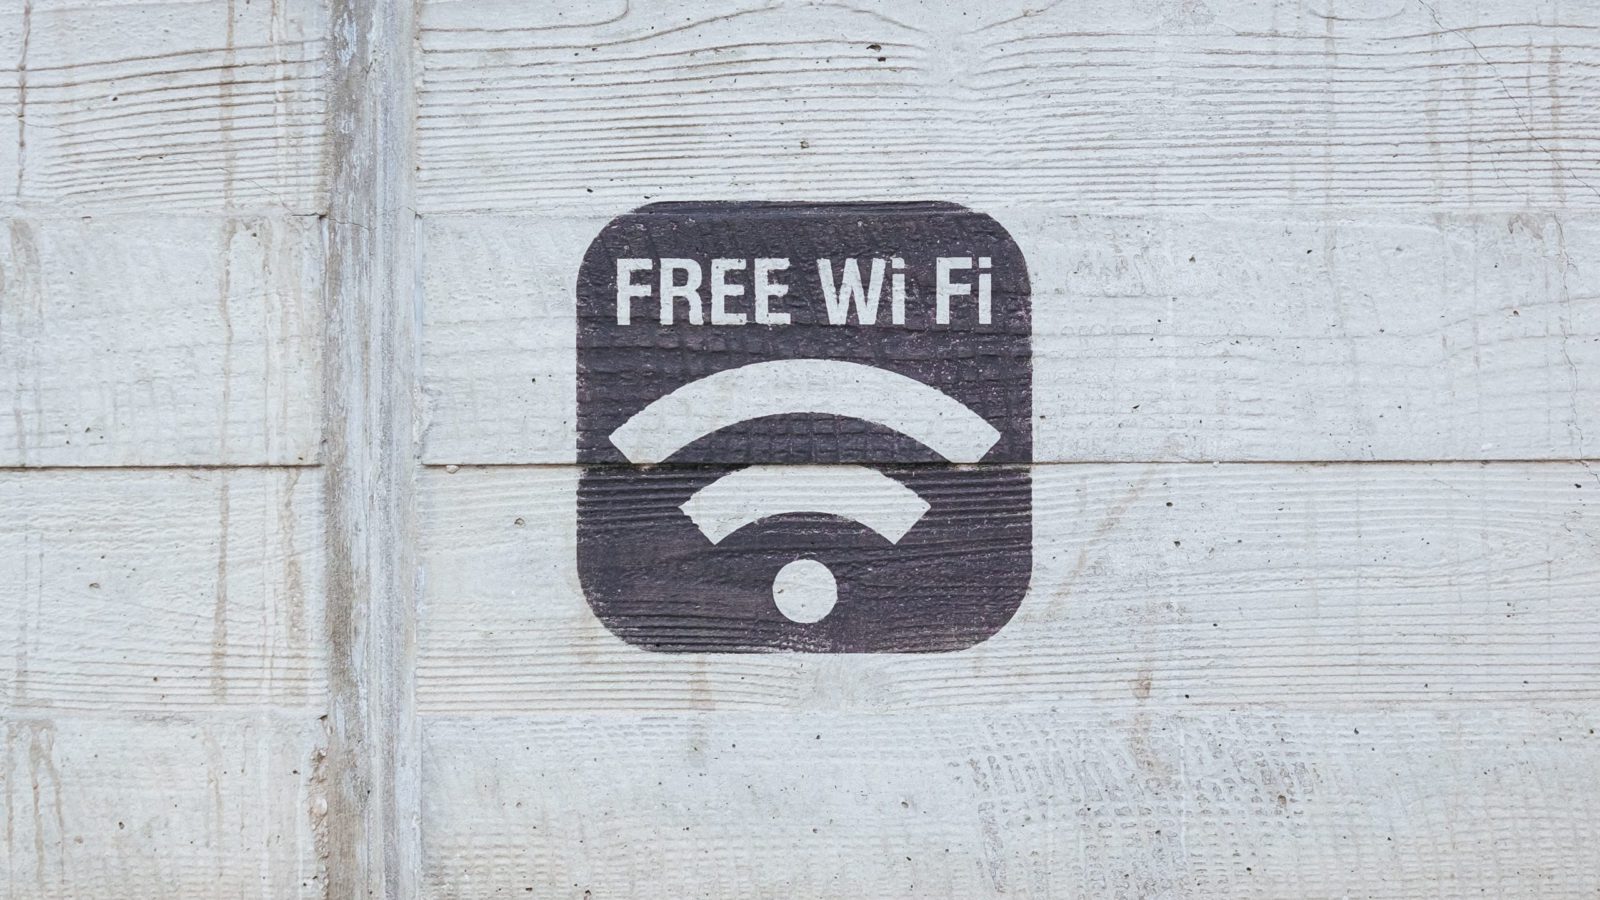 San Francisco, Antioquia for Digital Nomads: The Best WiFi Spots